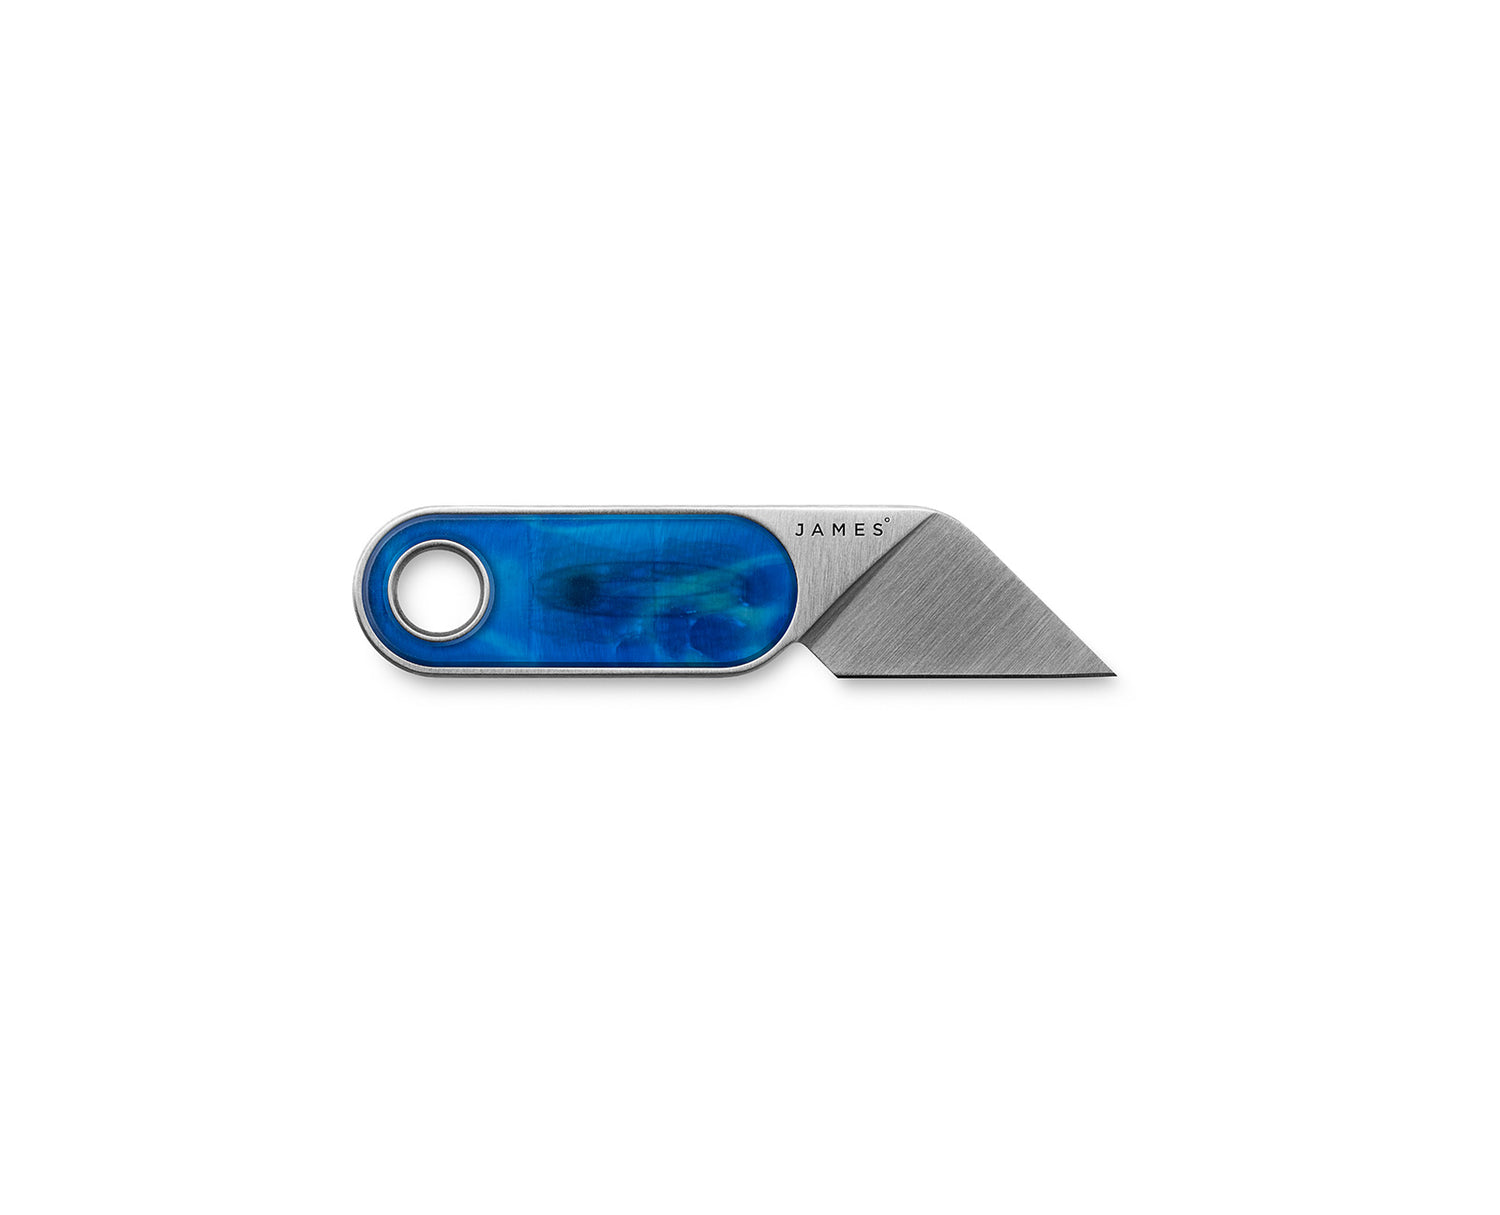 The Abbey knife with tie dye blue handle and stainless steel blade.